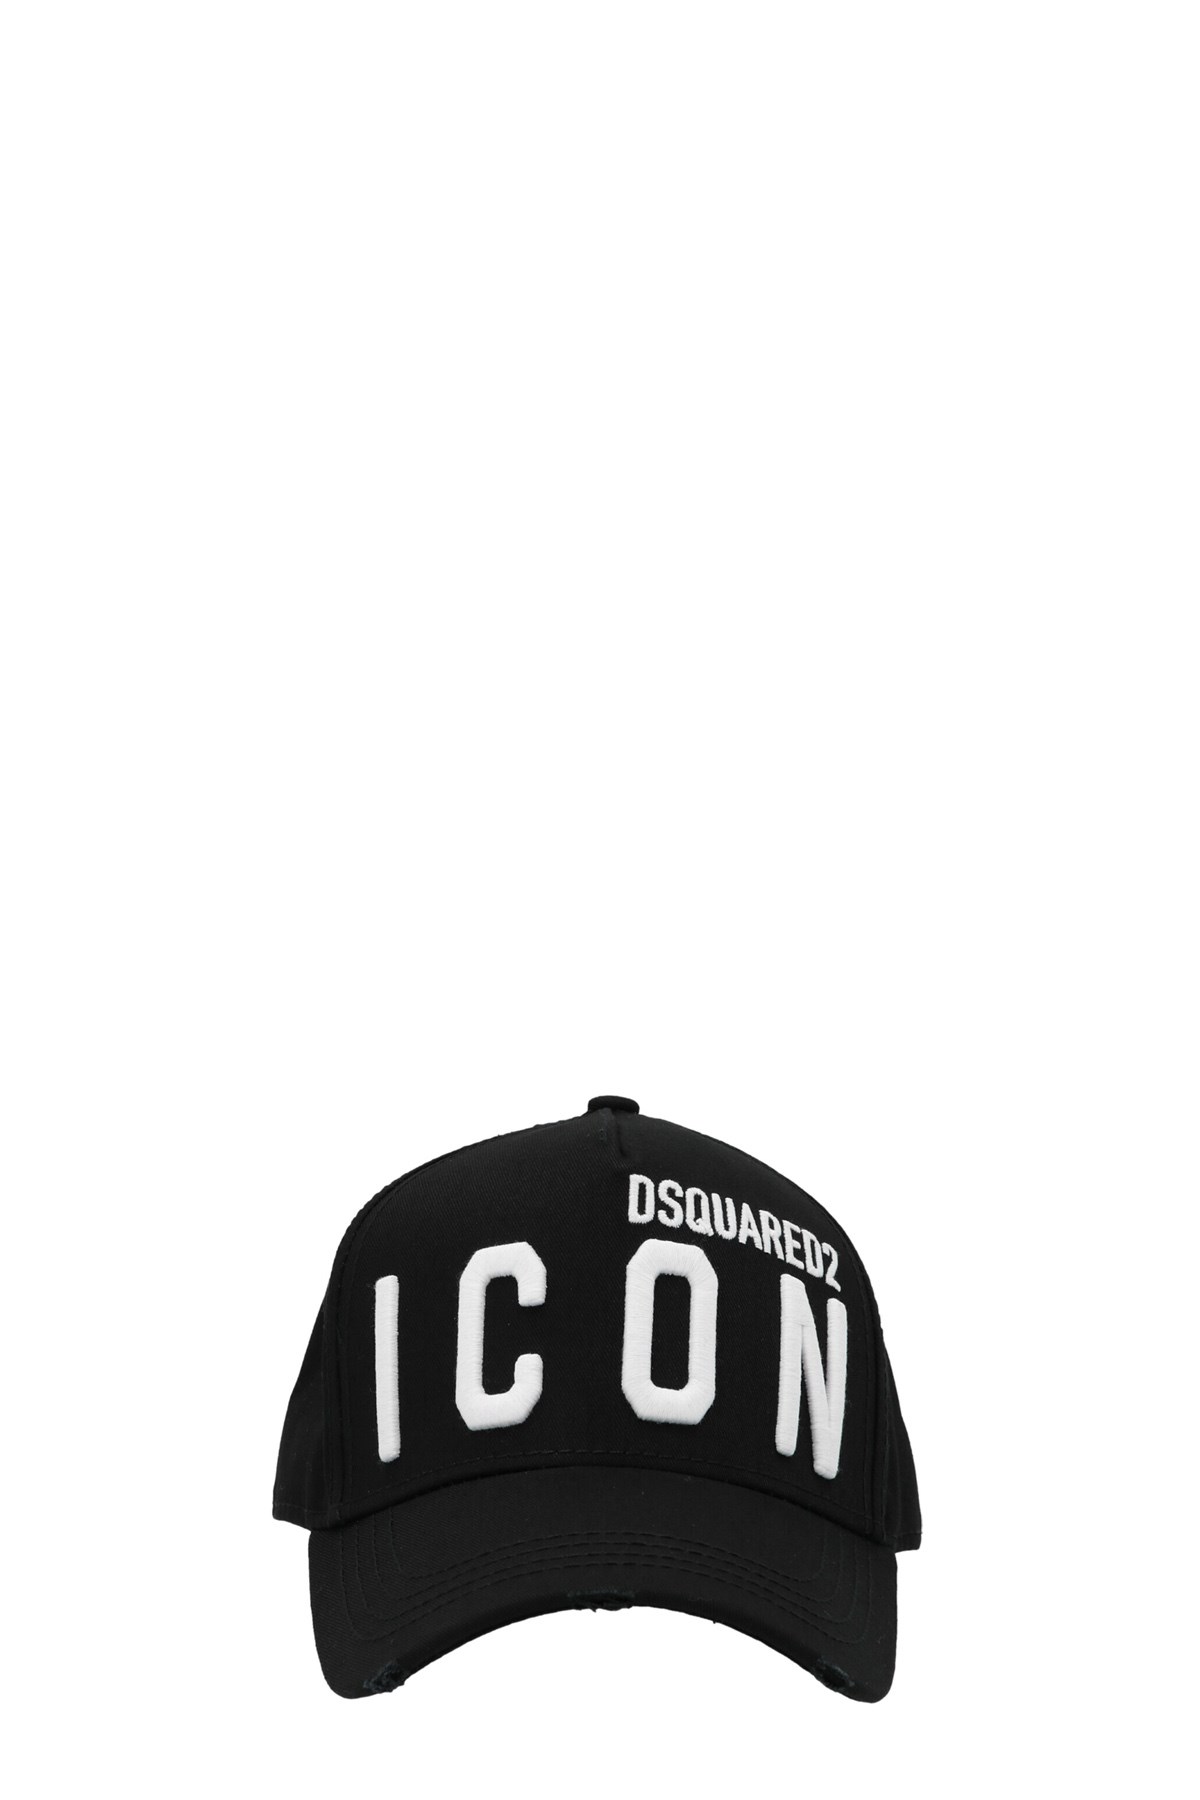 DSQUARED2 Kappe 'Icon'